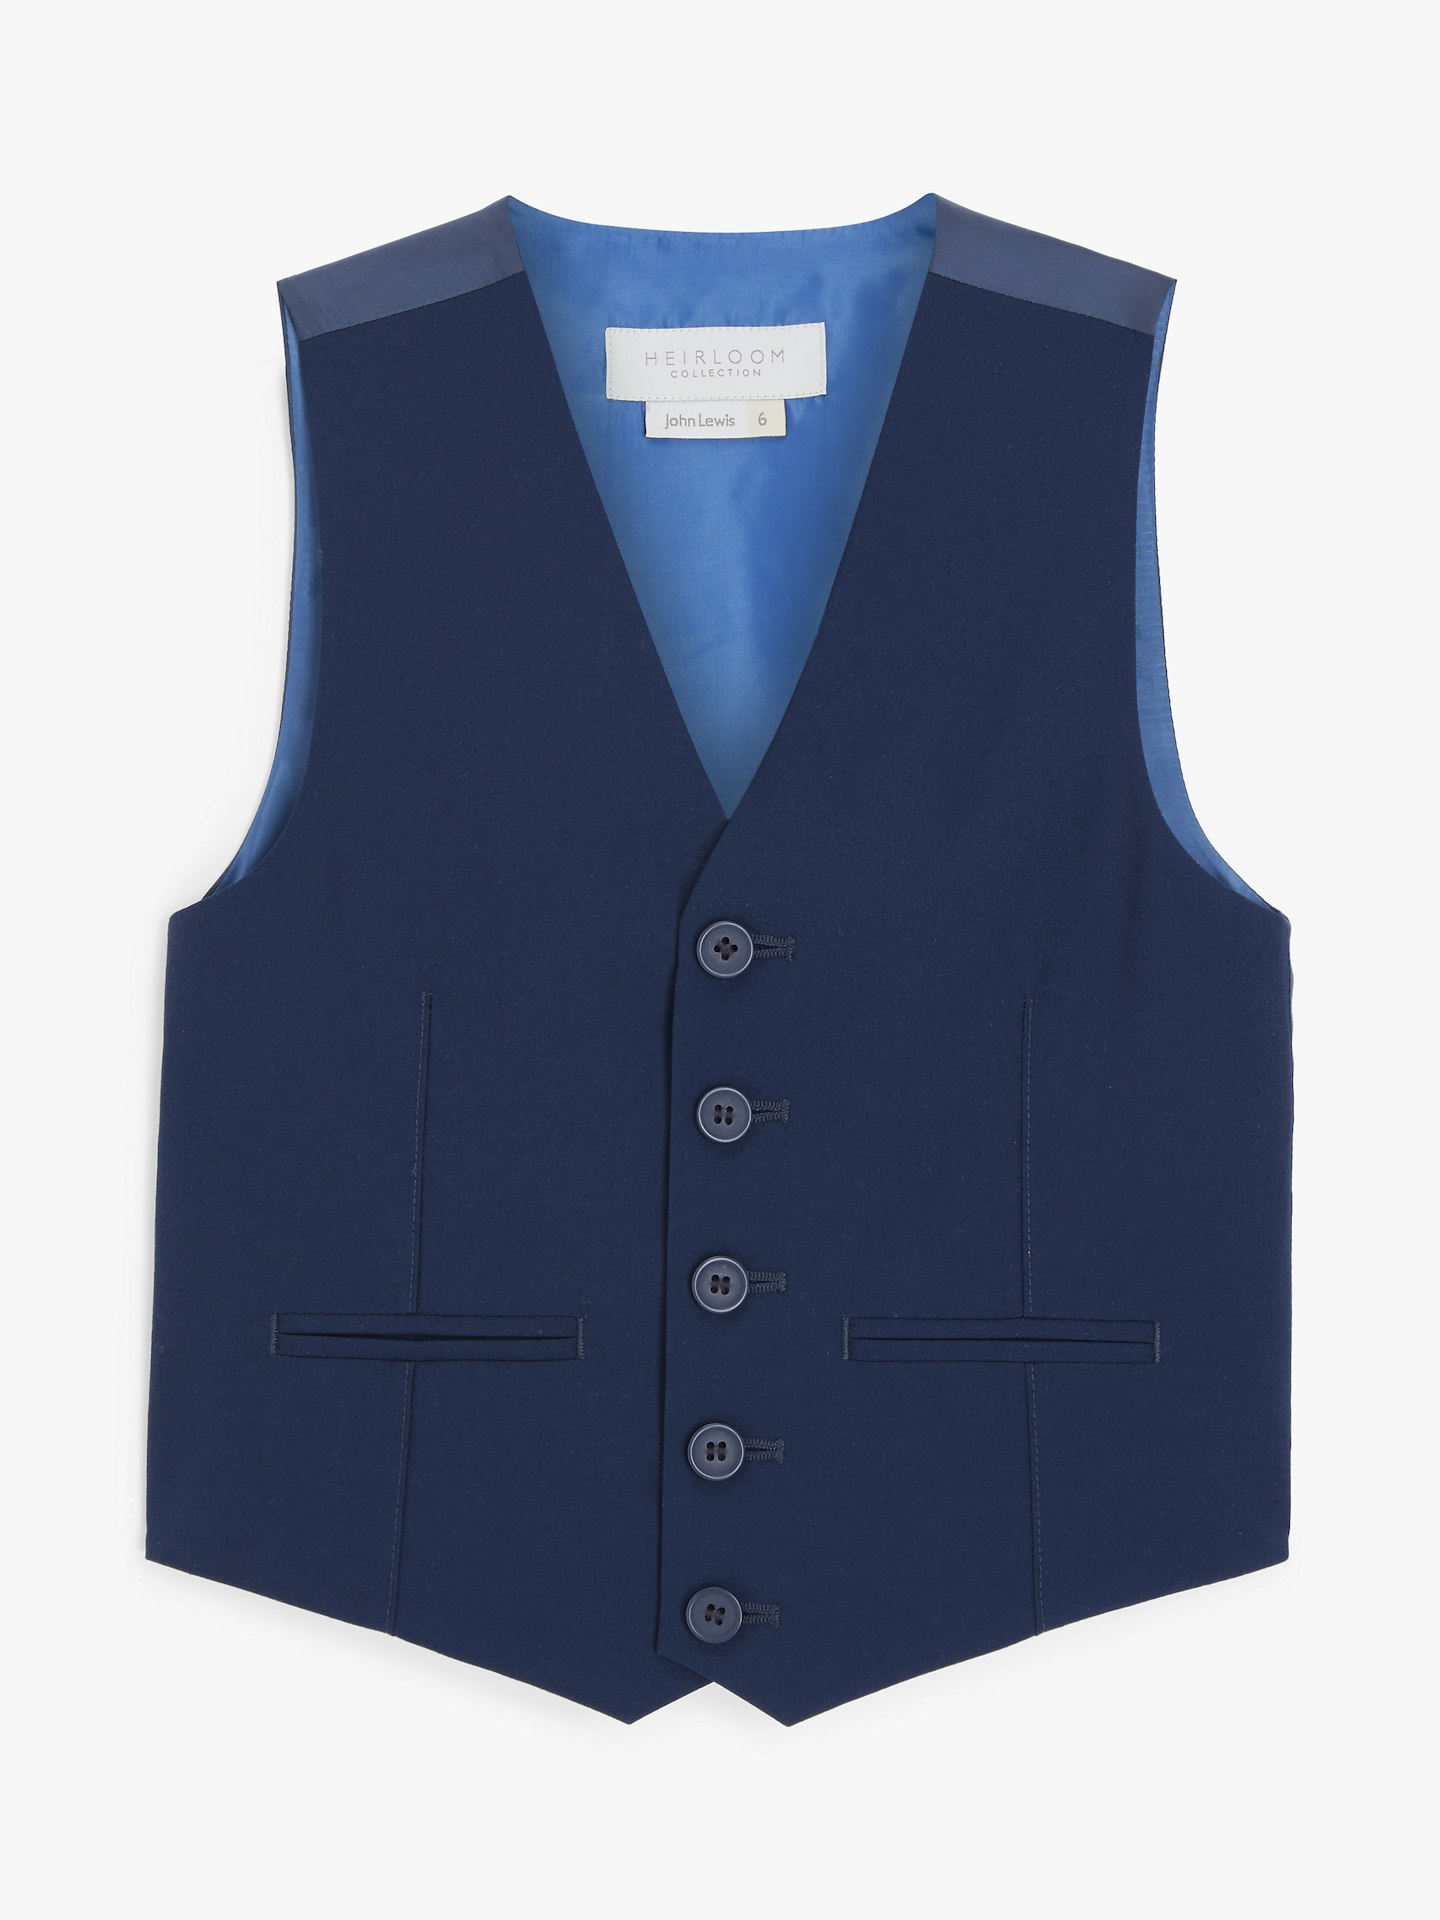 Heirloom Collection Twill Suit Waistcoat, 14 Credits